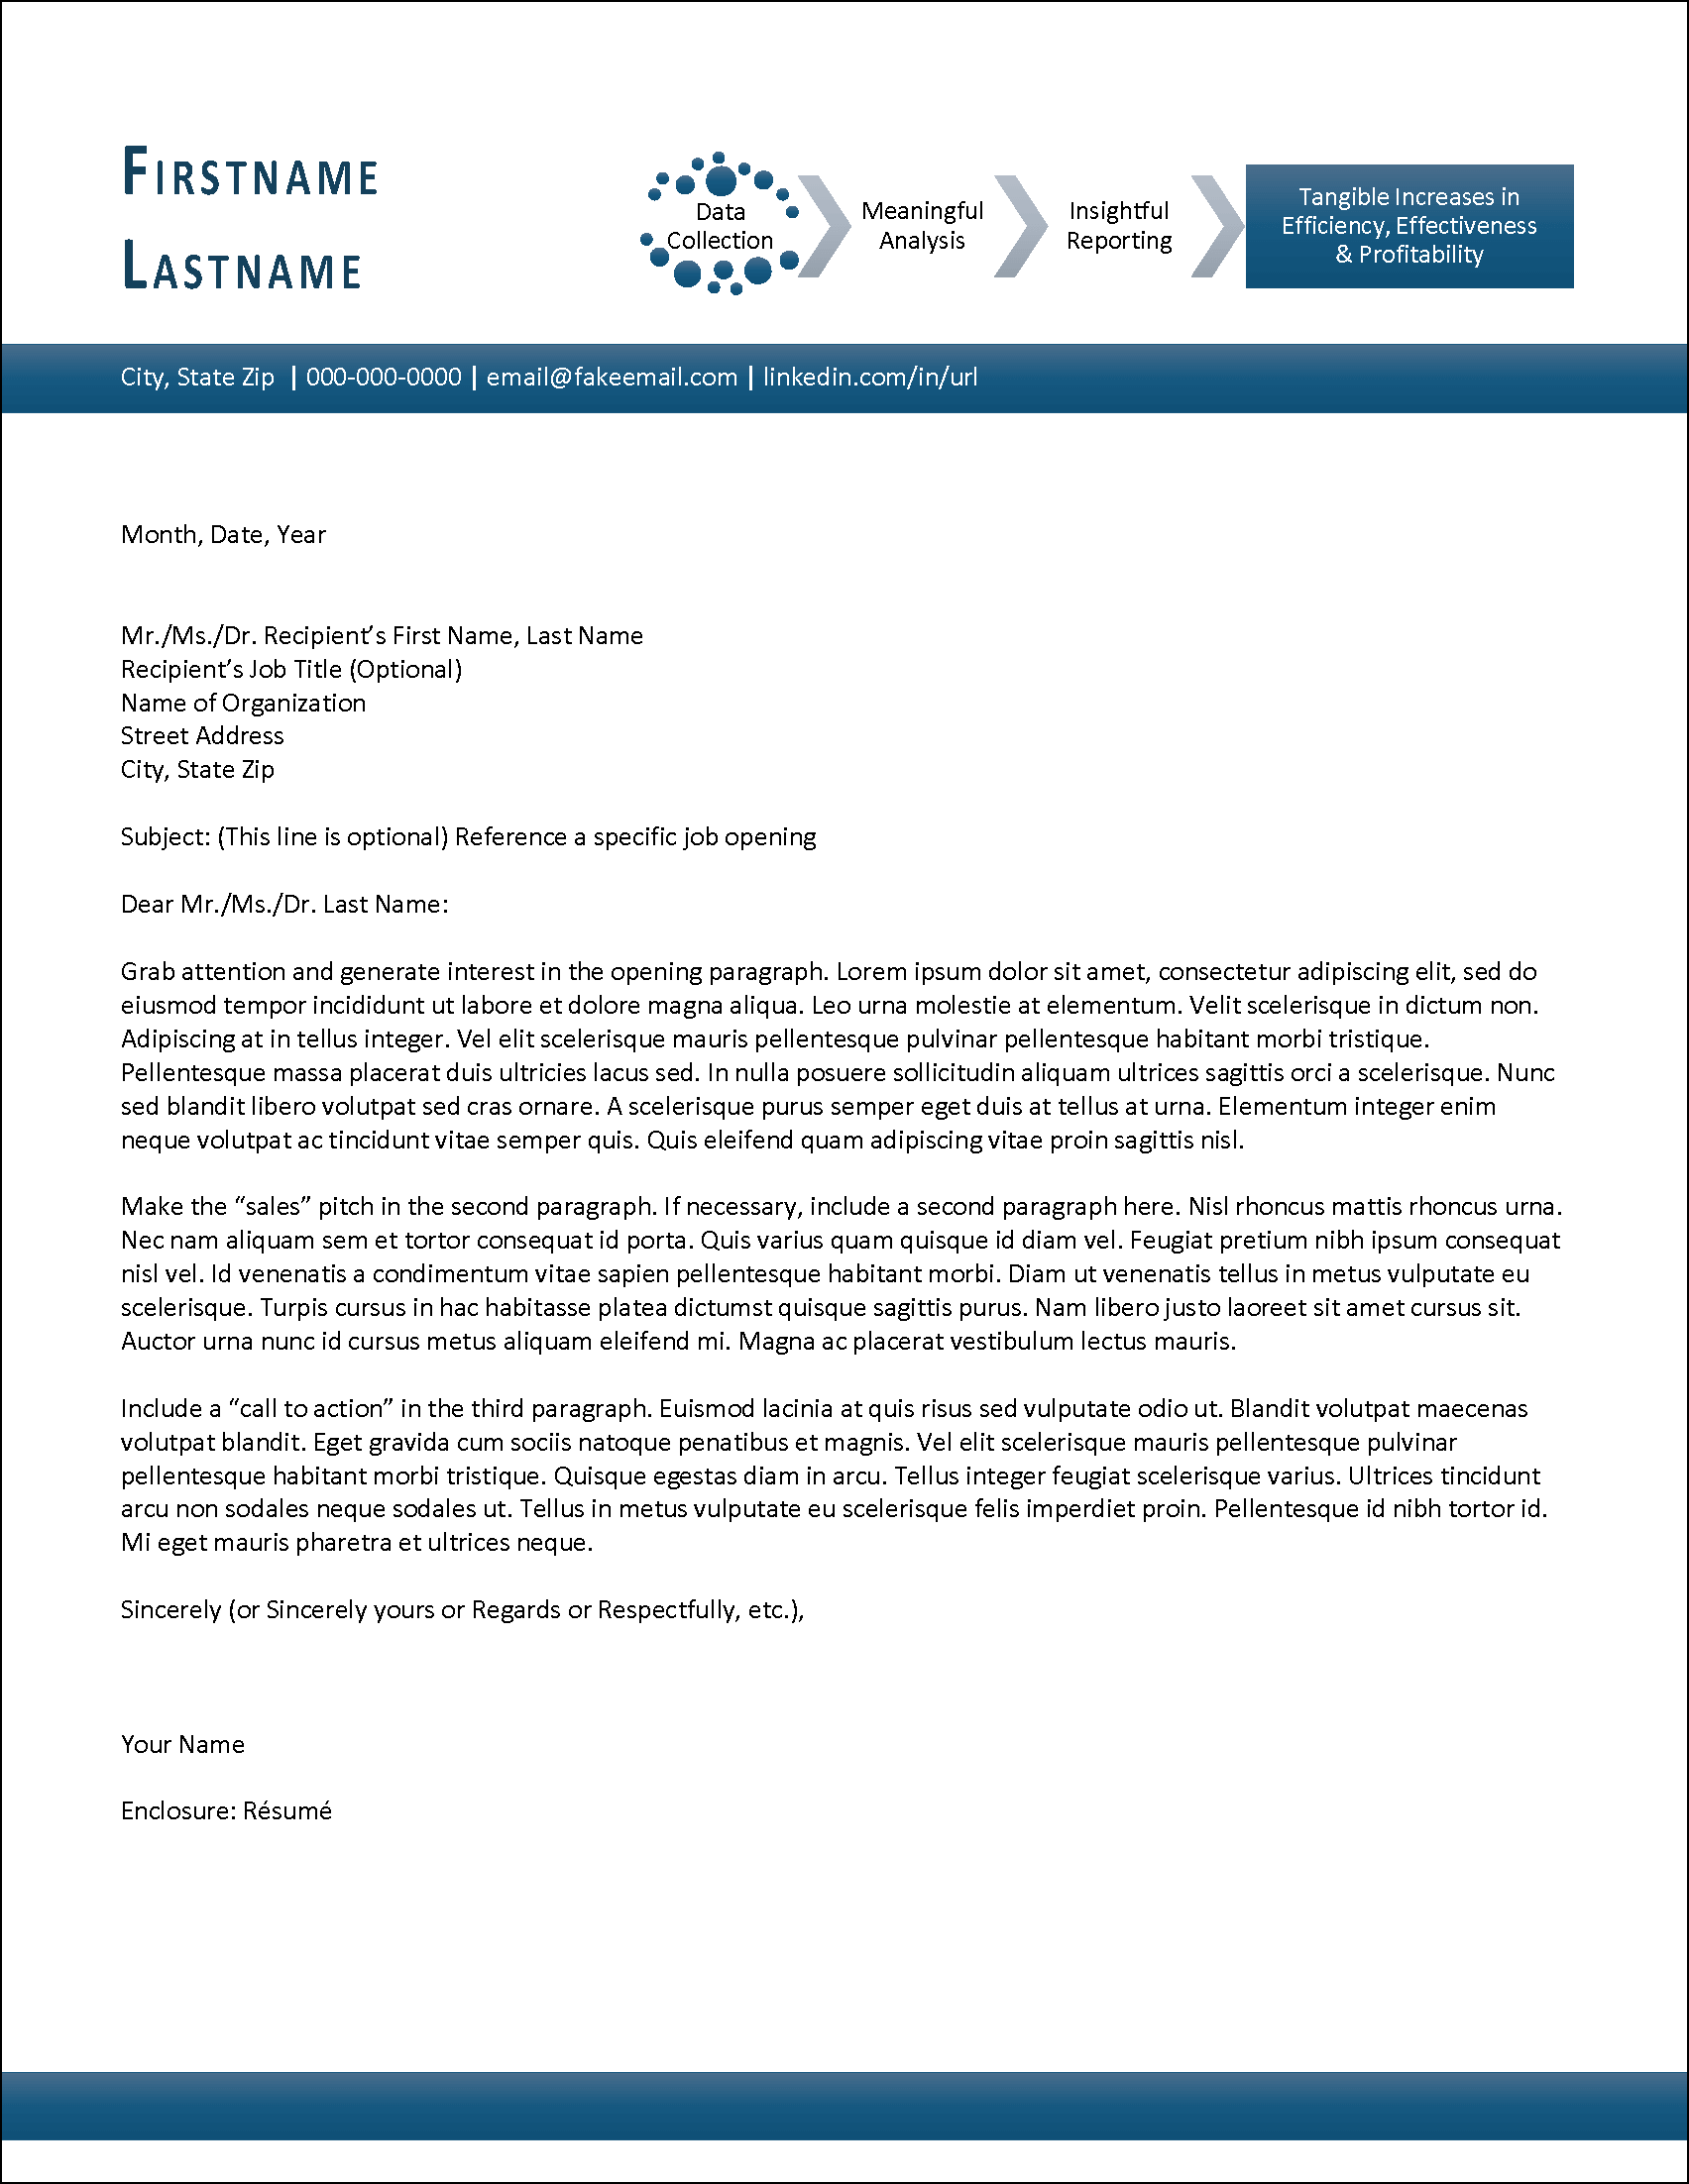 Data Analyst Cover Letter Template